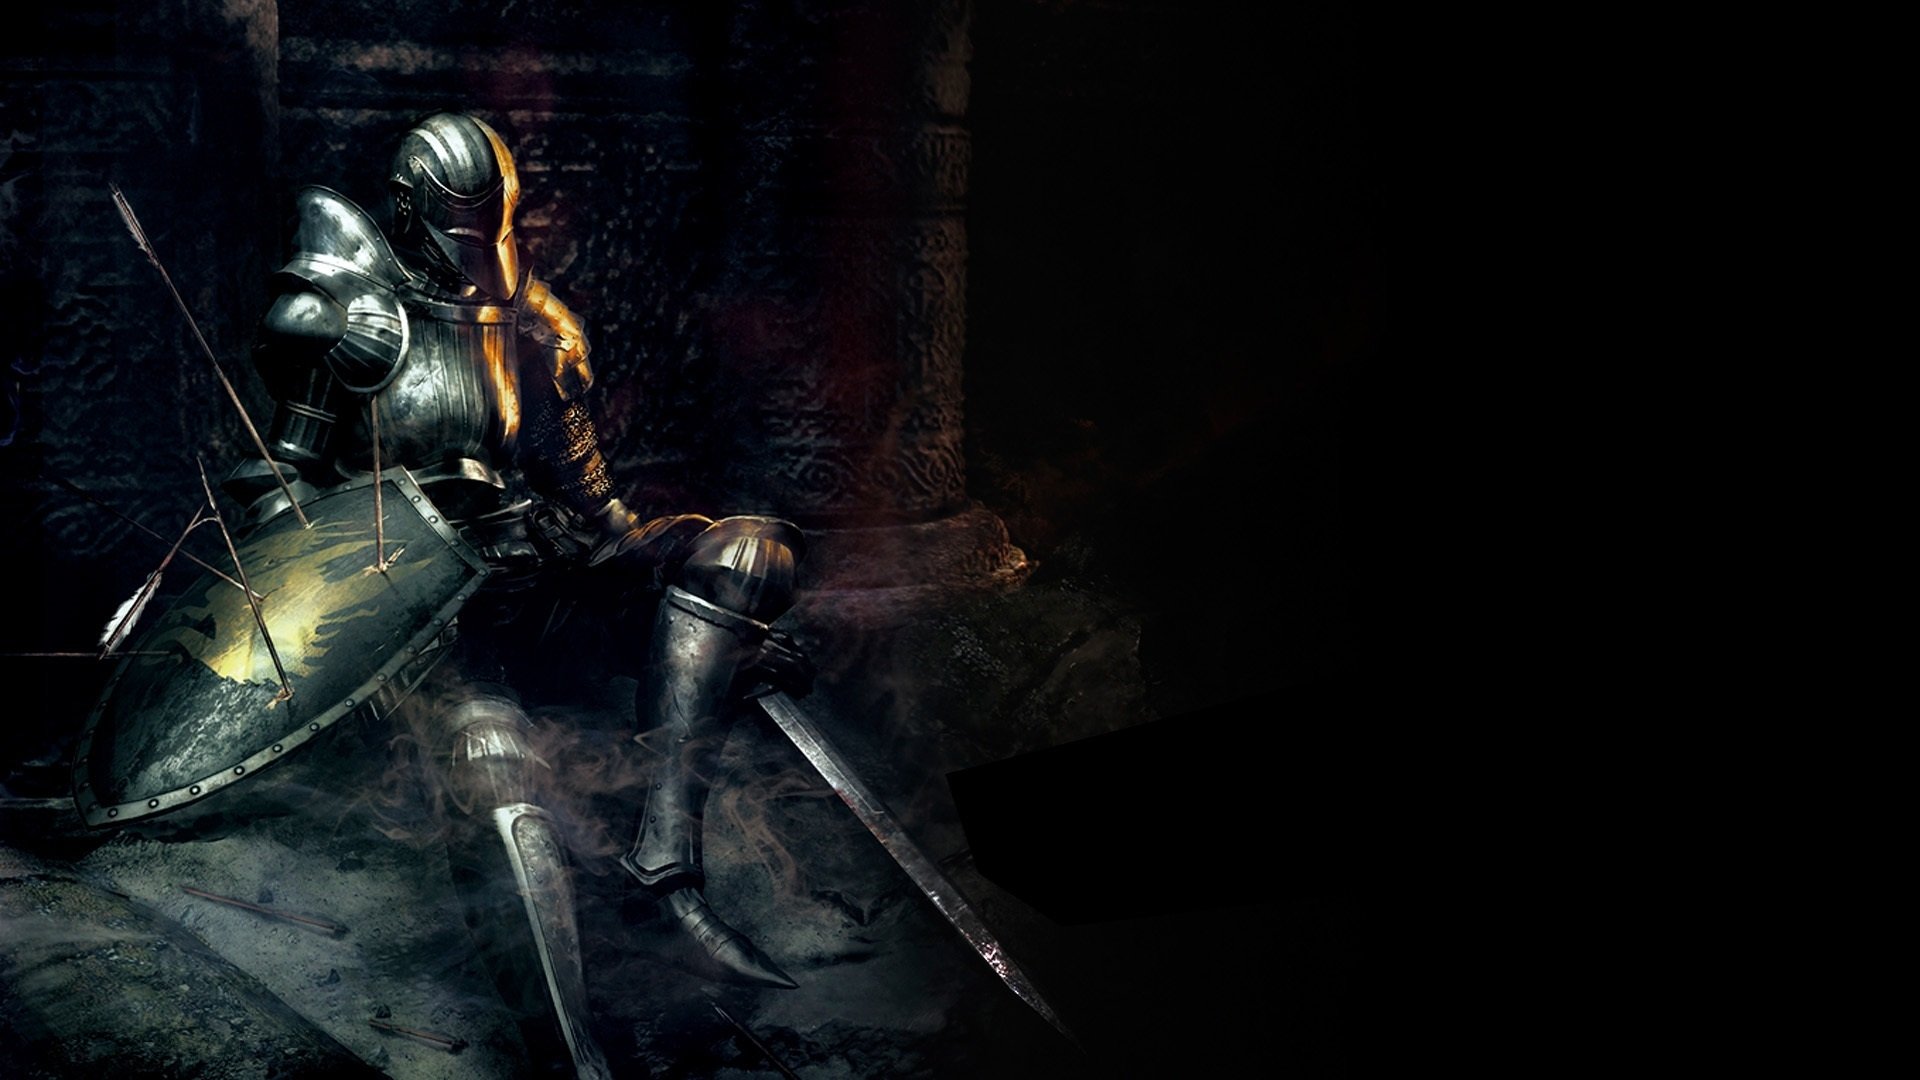 The Demon's Souls remake is not coming to PC after all